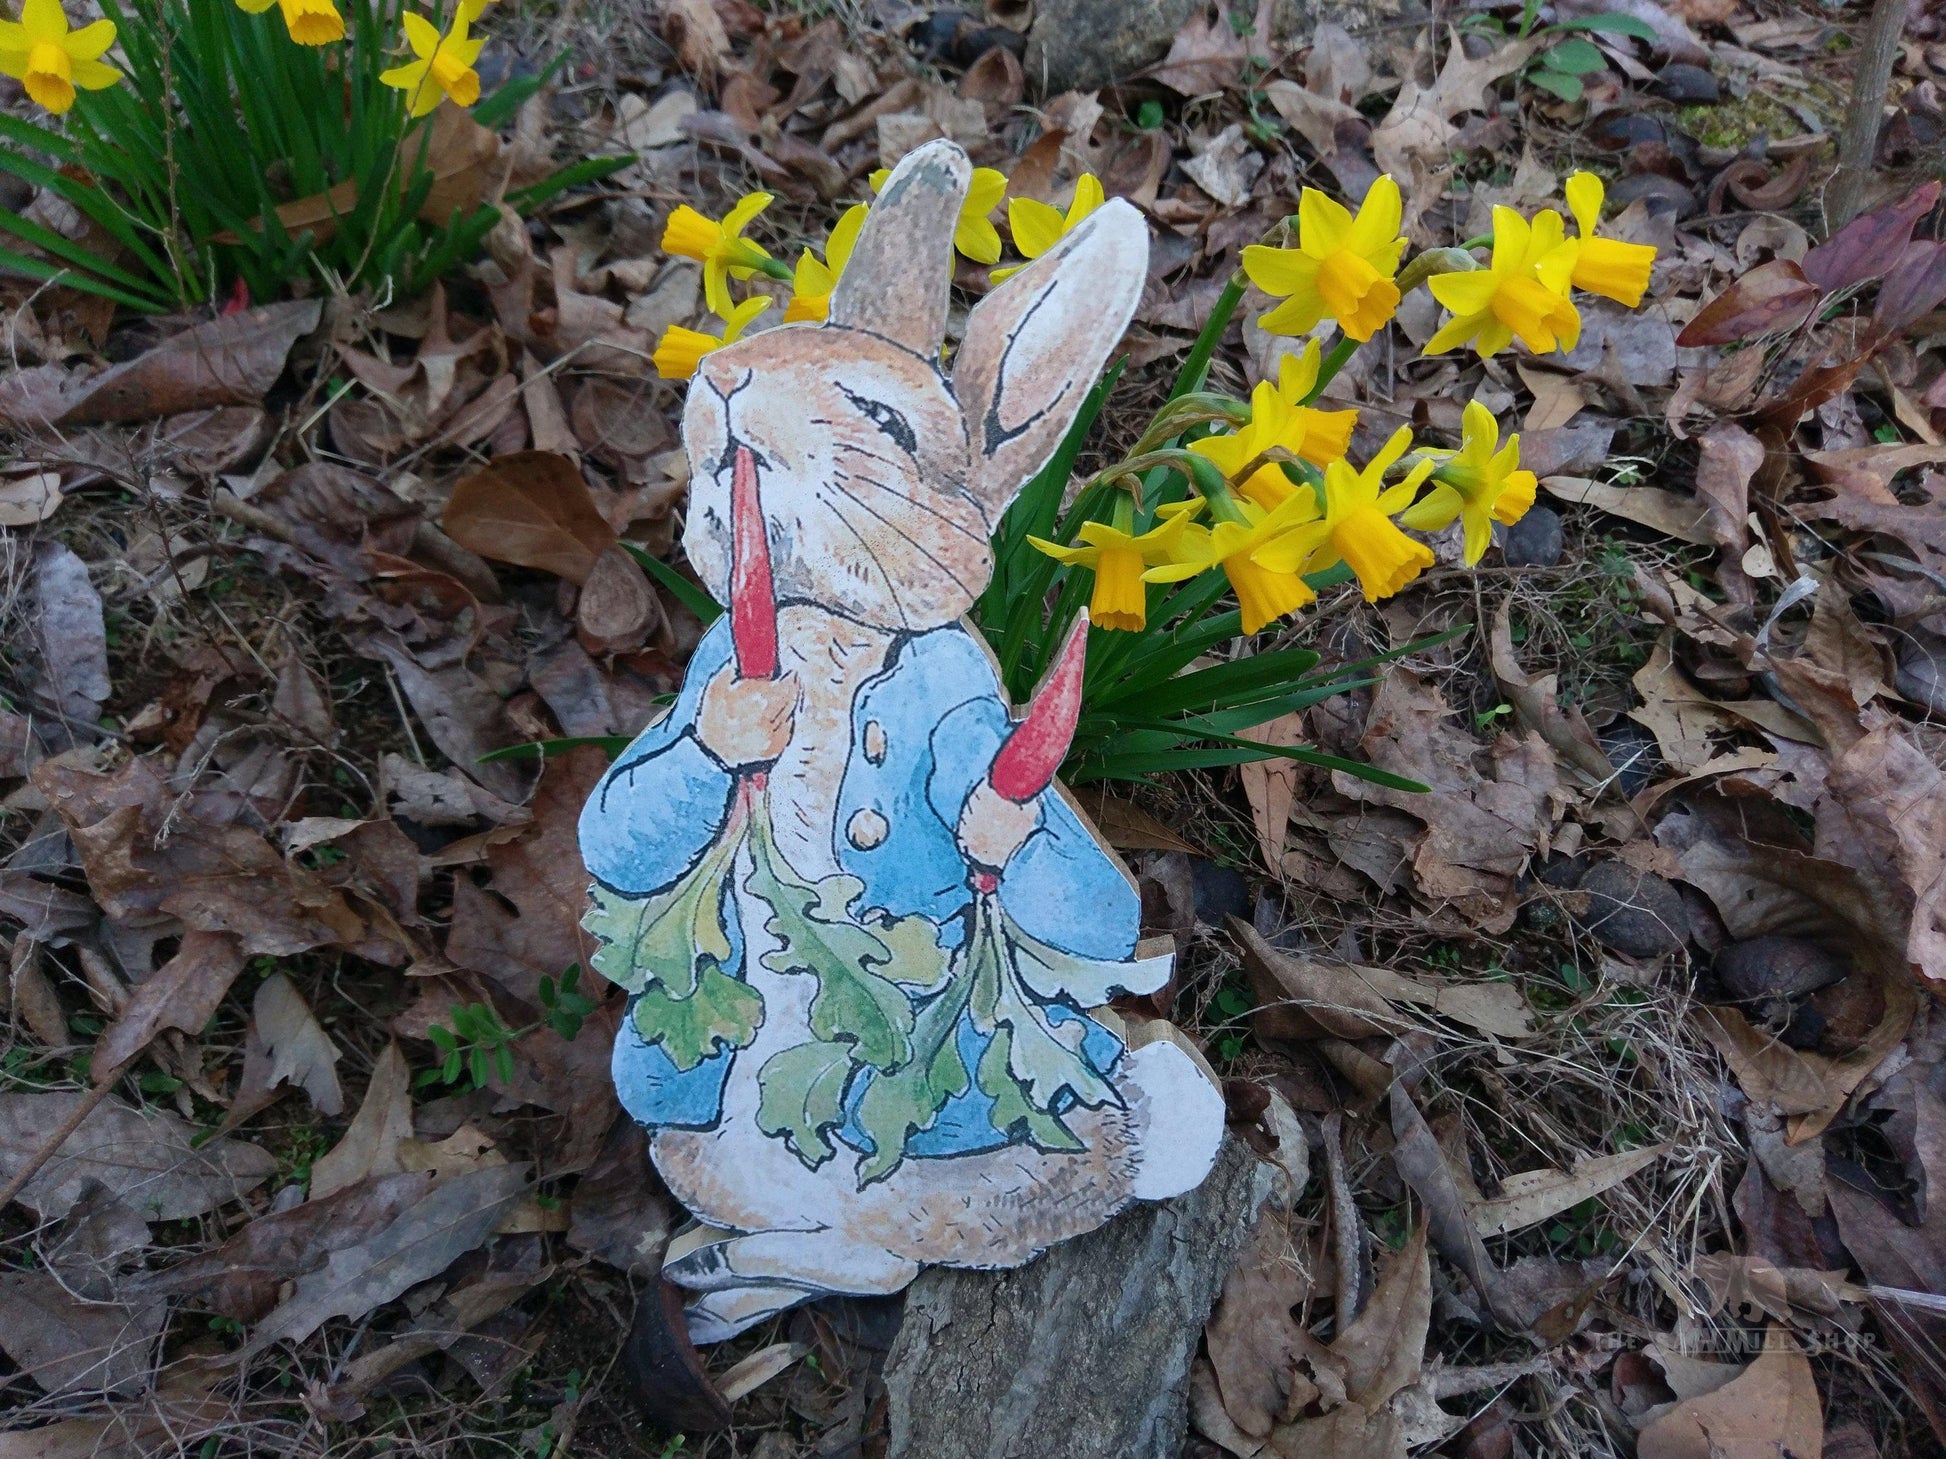 Vintage Peter Rabbit with Carrot Standing Wood Cutout for Easter Decorating or Nursery-The Sawmill Shop